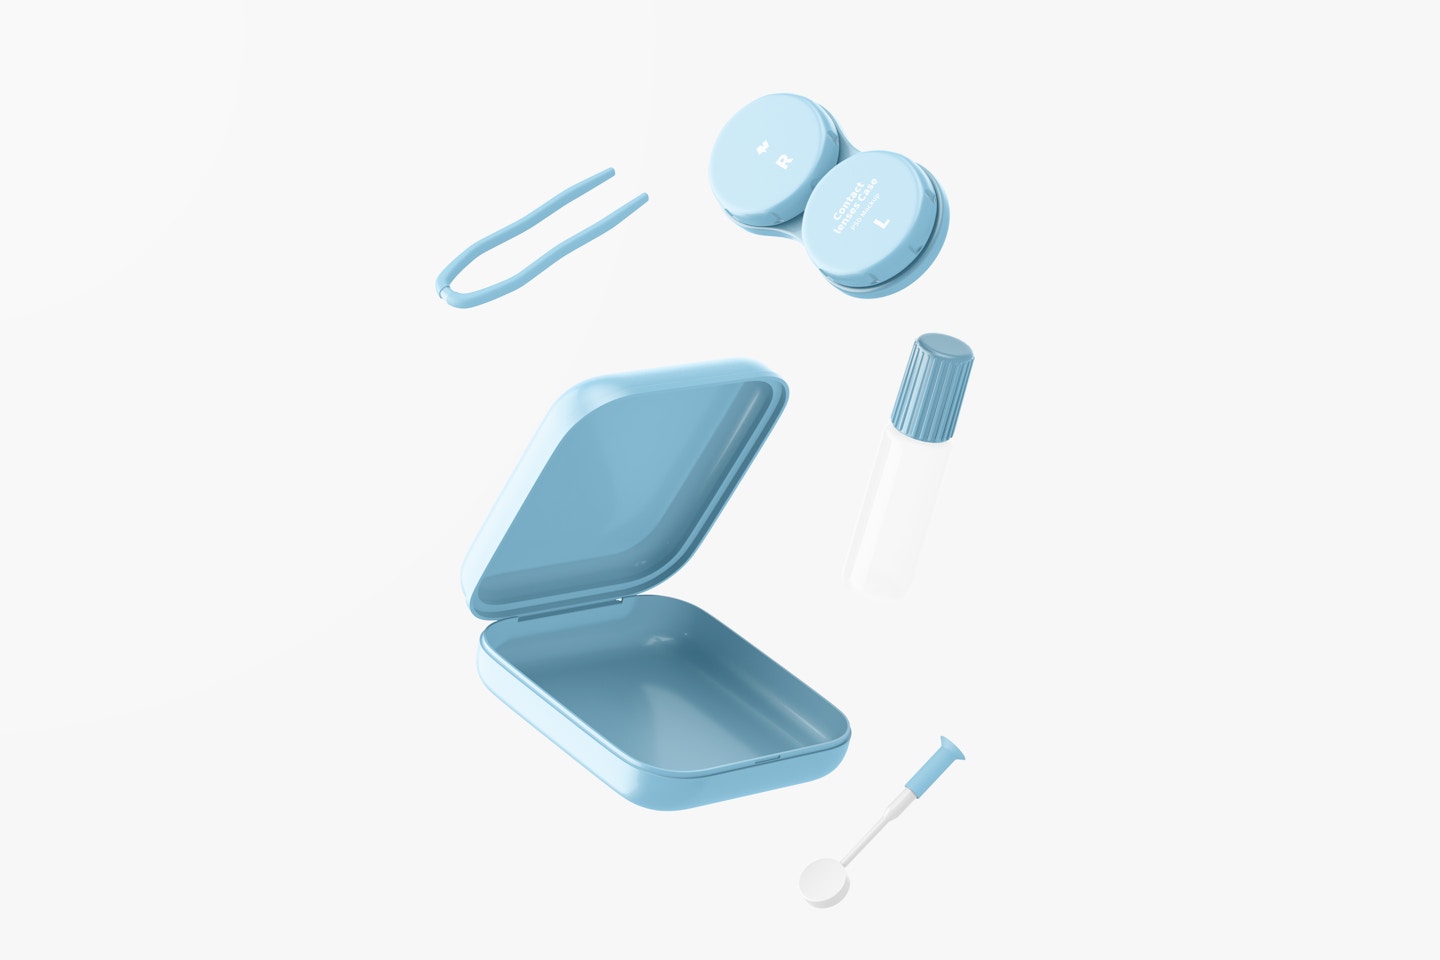 Contact Lenses Case Mockup, Floating